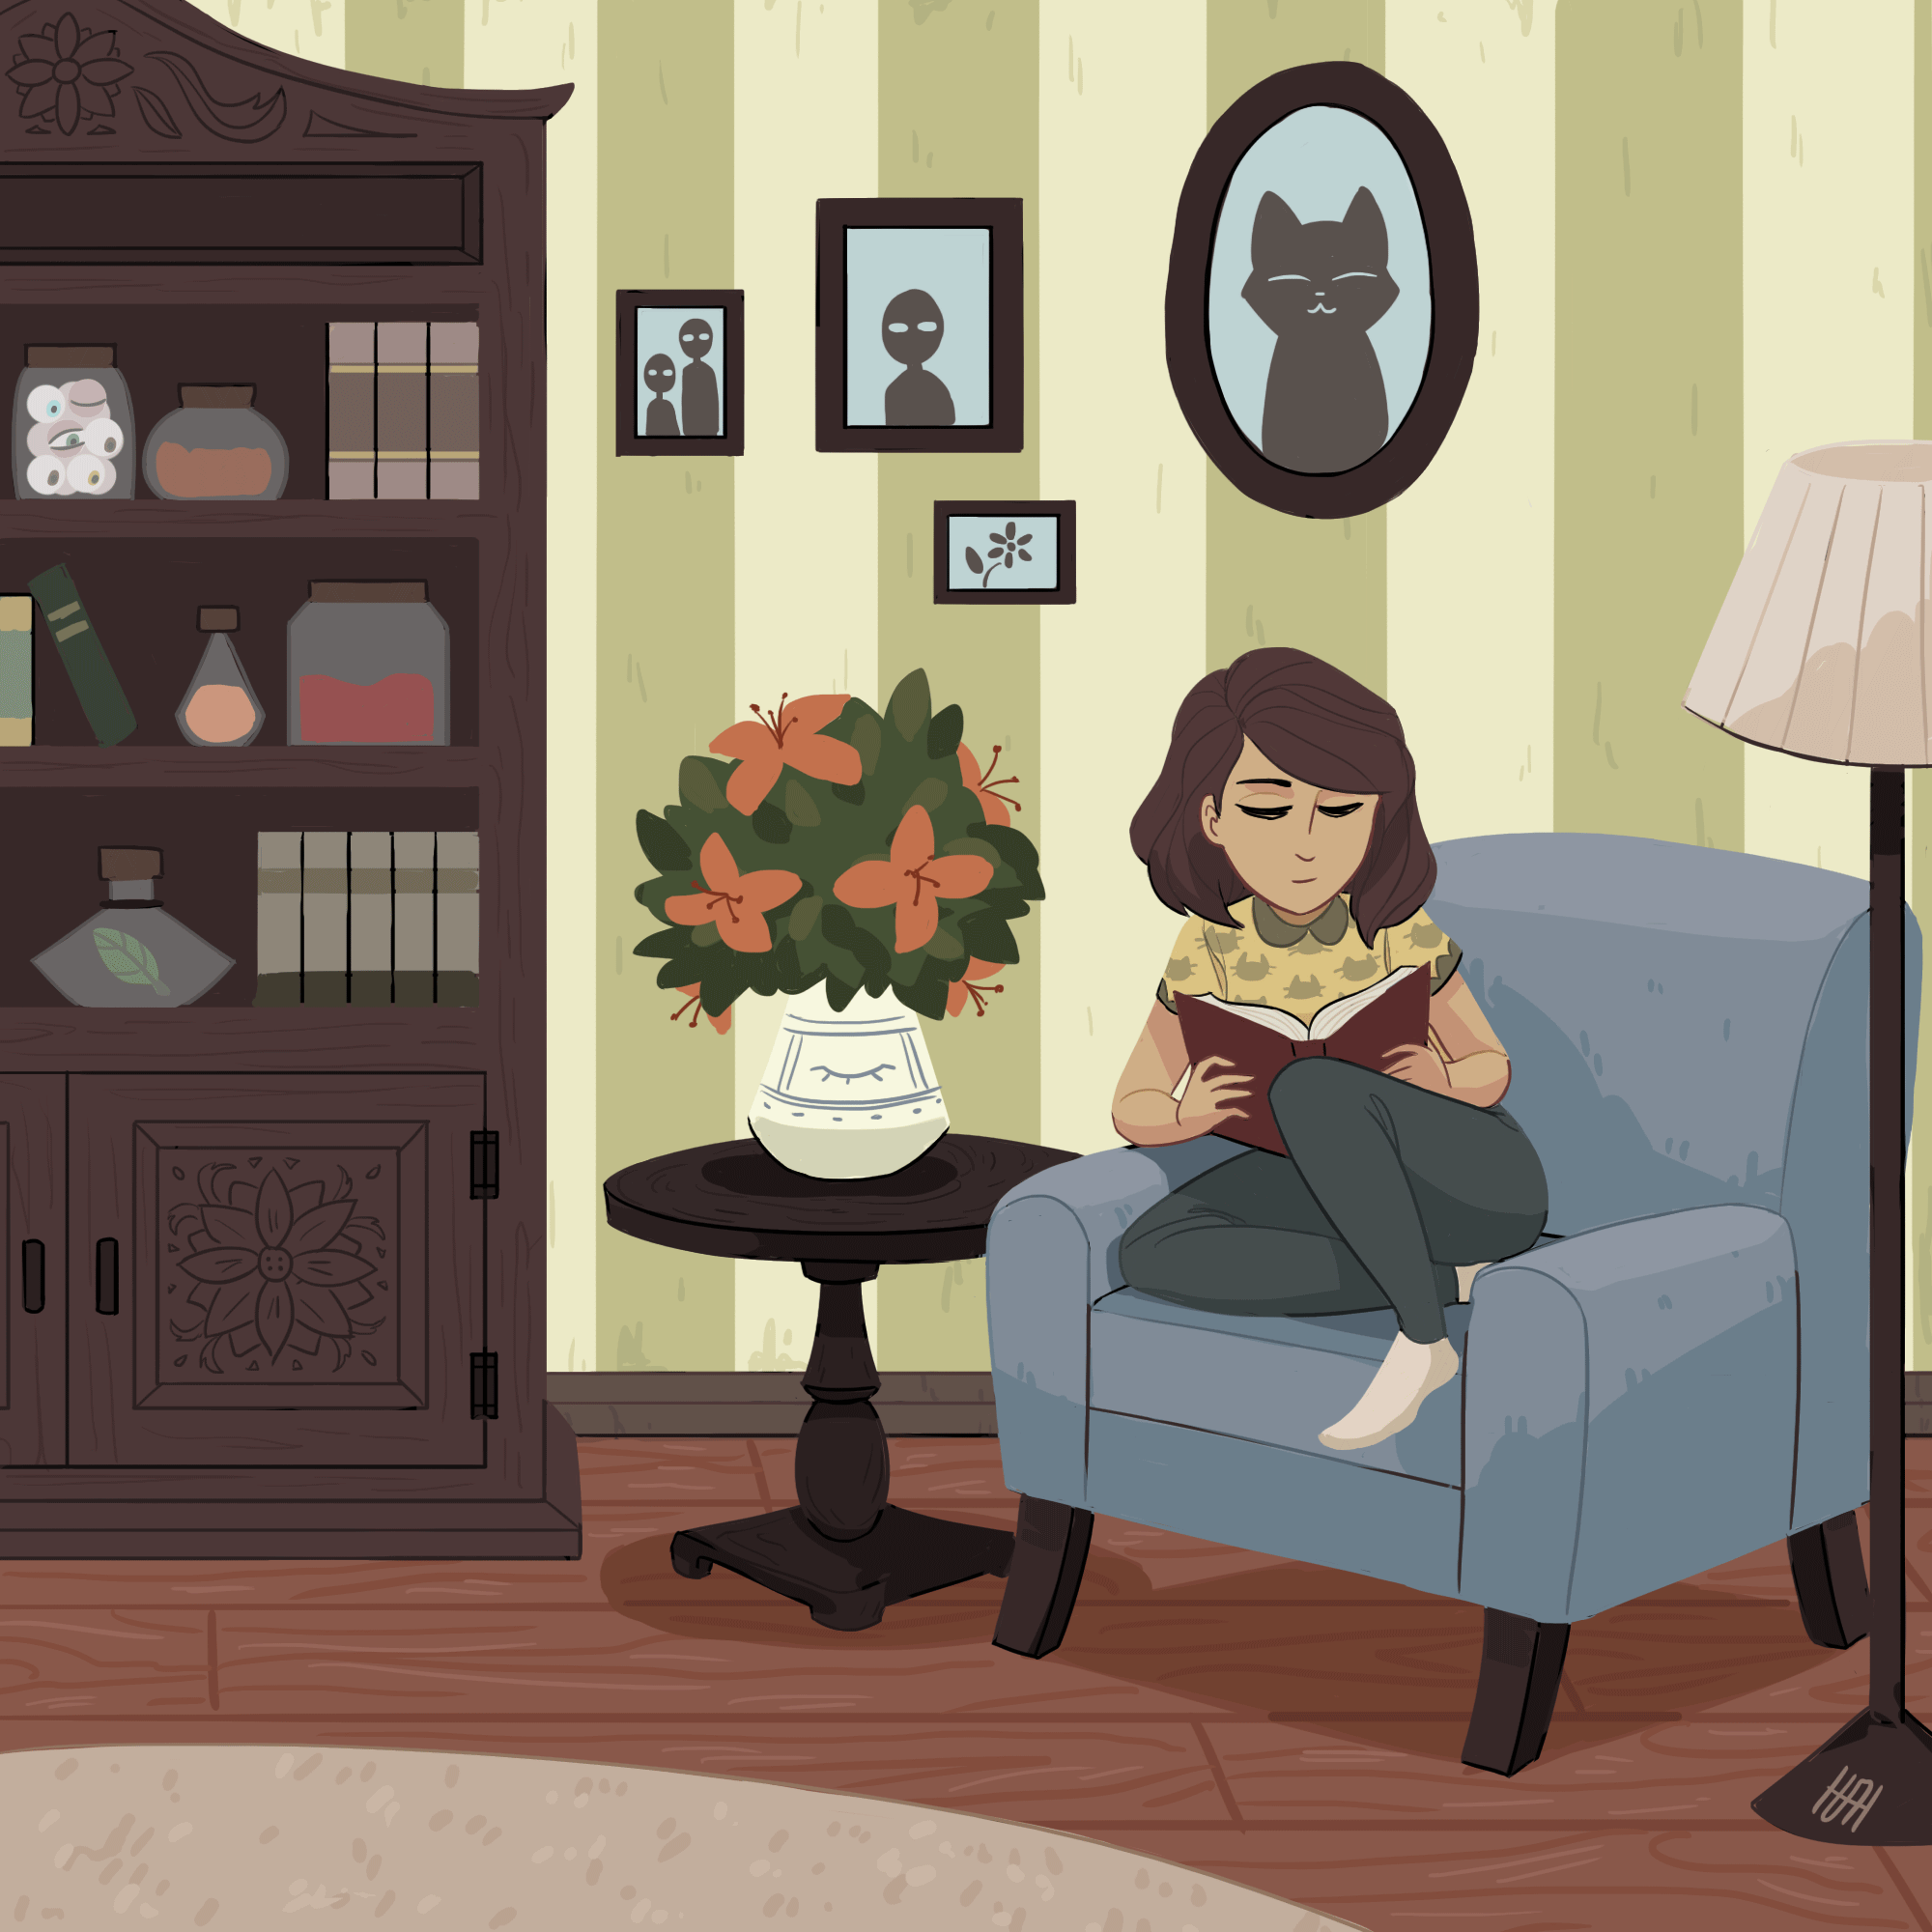 Reading [gif] by IsaTwoThree on DeviantArt